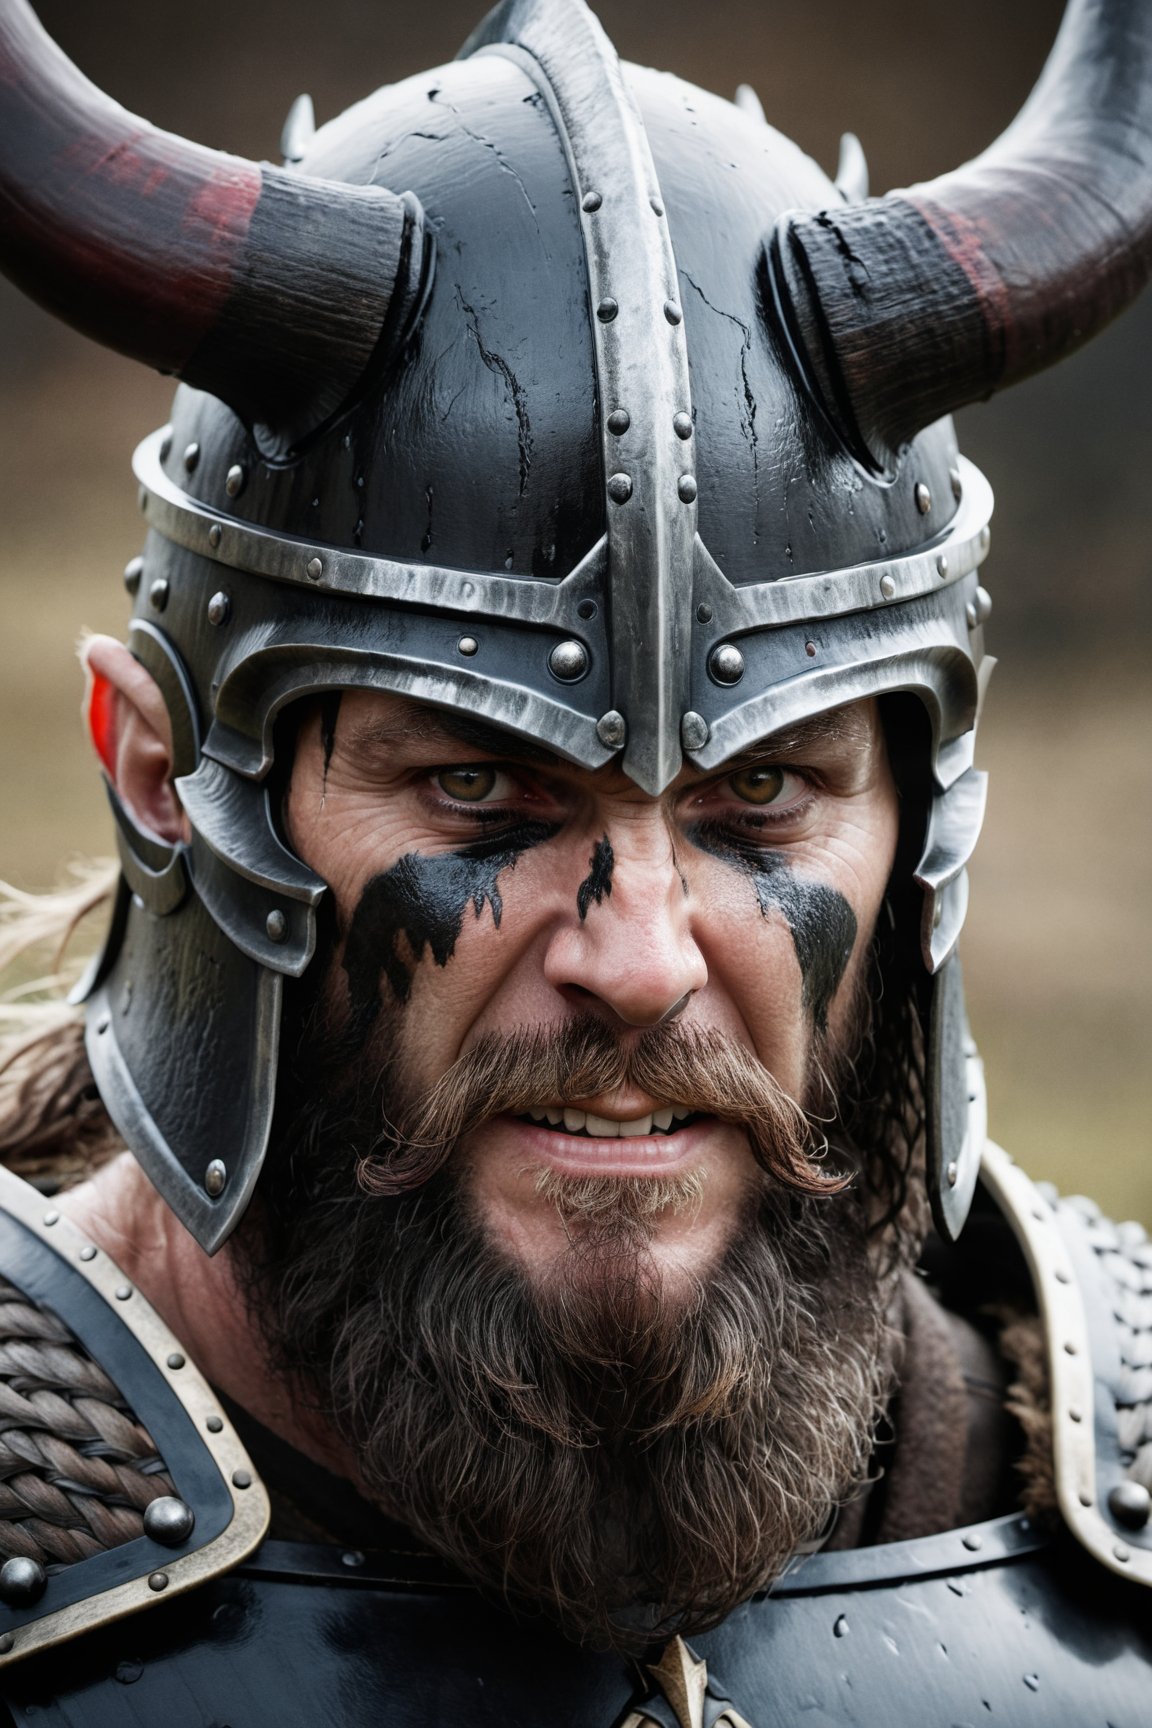 (best quality,highres),ultra-detailed,realistic,portrait,monochrome,soft light,sharp focus,masterpiece:1.2,Viking King,dripping wet black mud,dark metal helmet,imposing black horns,fierce expression,weathered face,long beard,ferocious gaze,sinister grin,muscular build,sturdy armor,battle scars,red warpaint,cold steel,glistening chainmail,rough texture,warrior,strength and power,dominance,authority,proud,mythical,ancient,legendary,luxurious fur trim,deep shadows,intense eyes,harsh environment,menacing atmosphere

